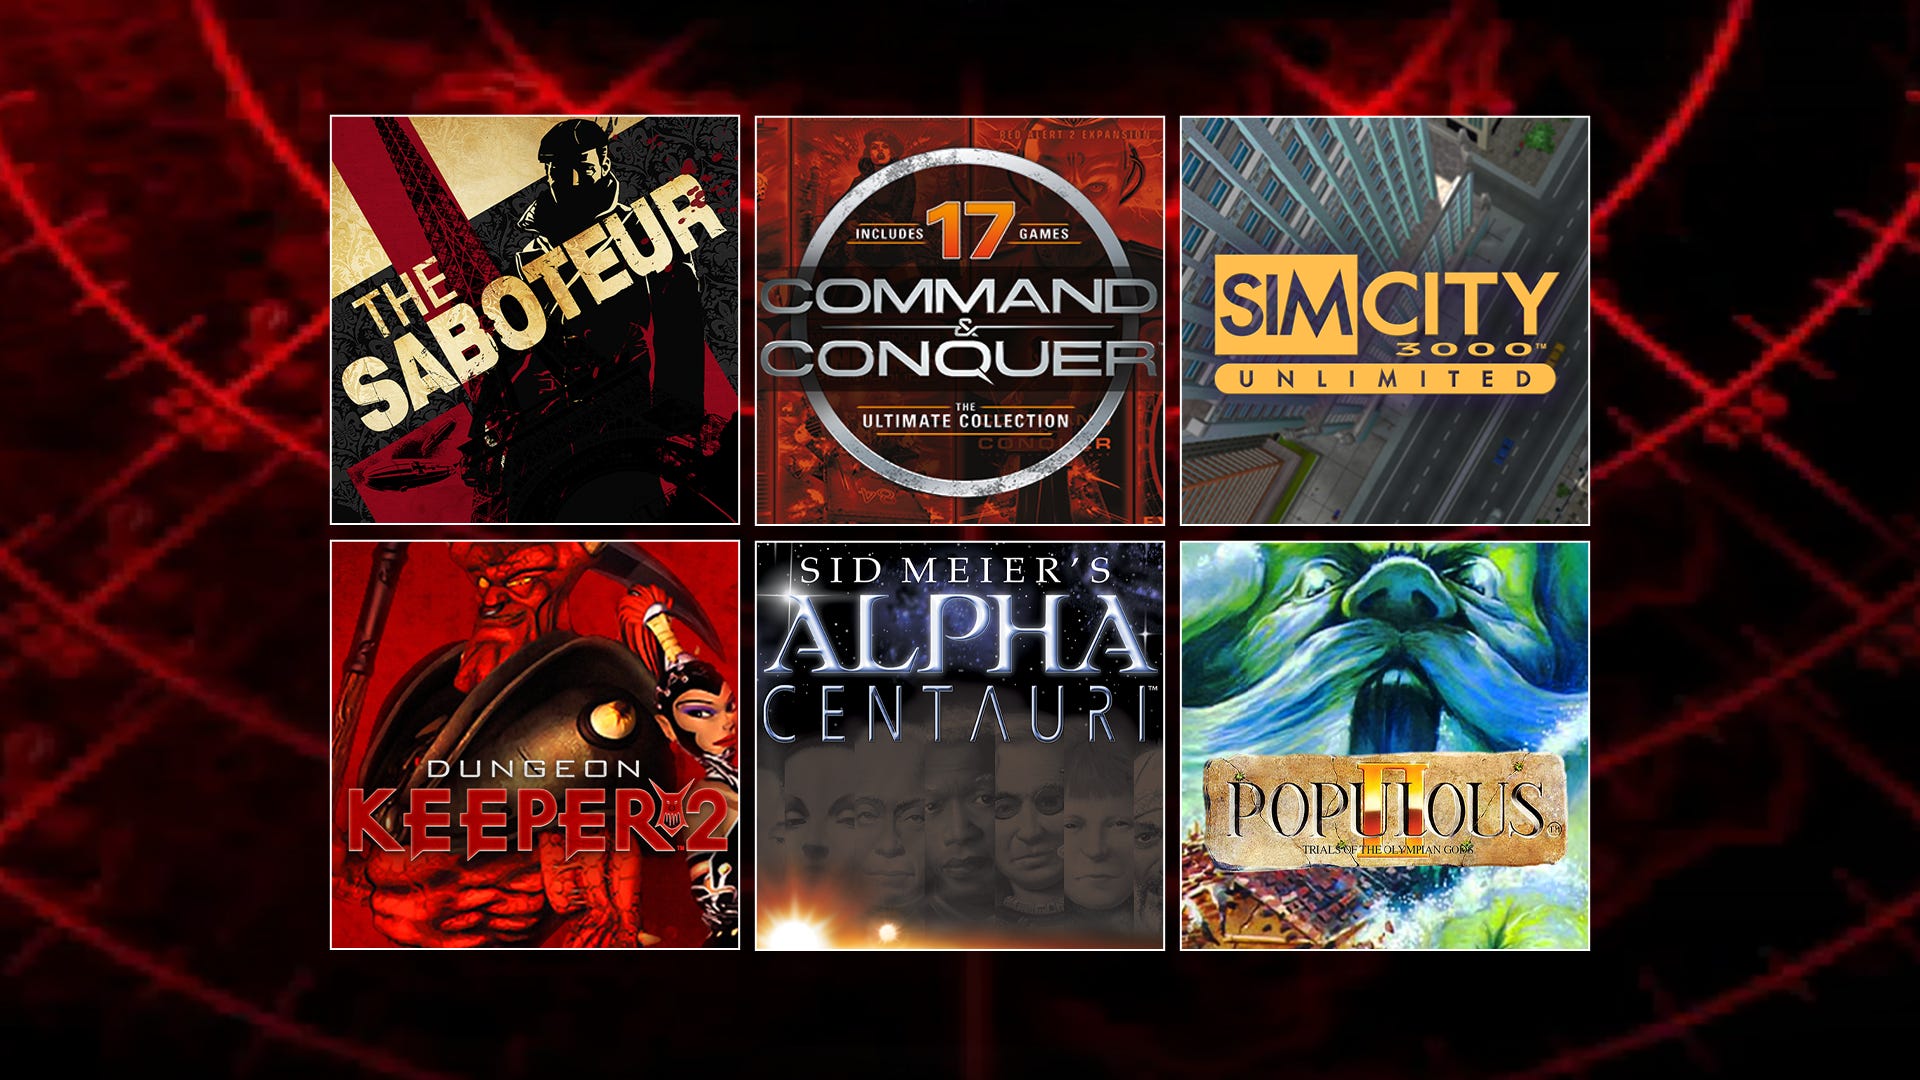 EA has added nine of its classic PC titles to Steam including Dungeon Keeper, Populous, Sim City 3000, The Saboteur, and more